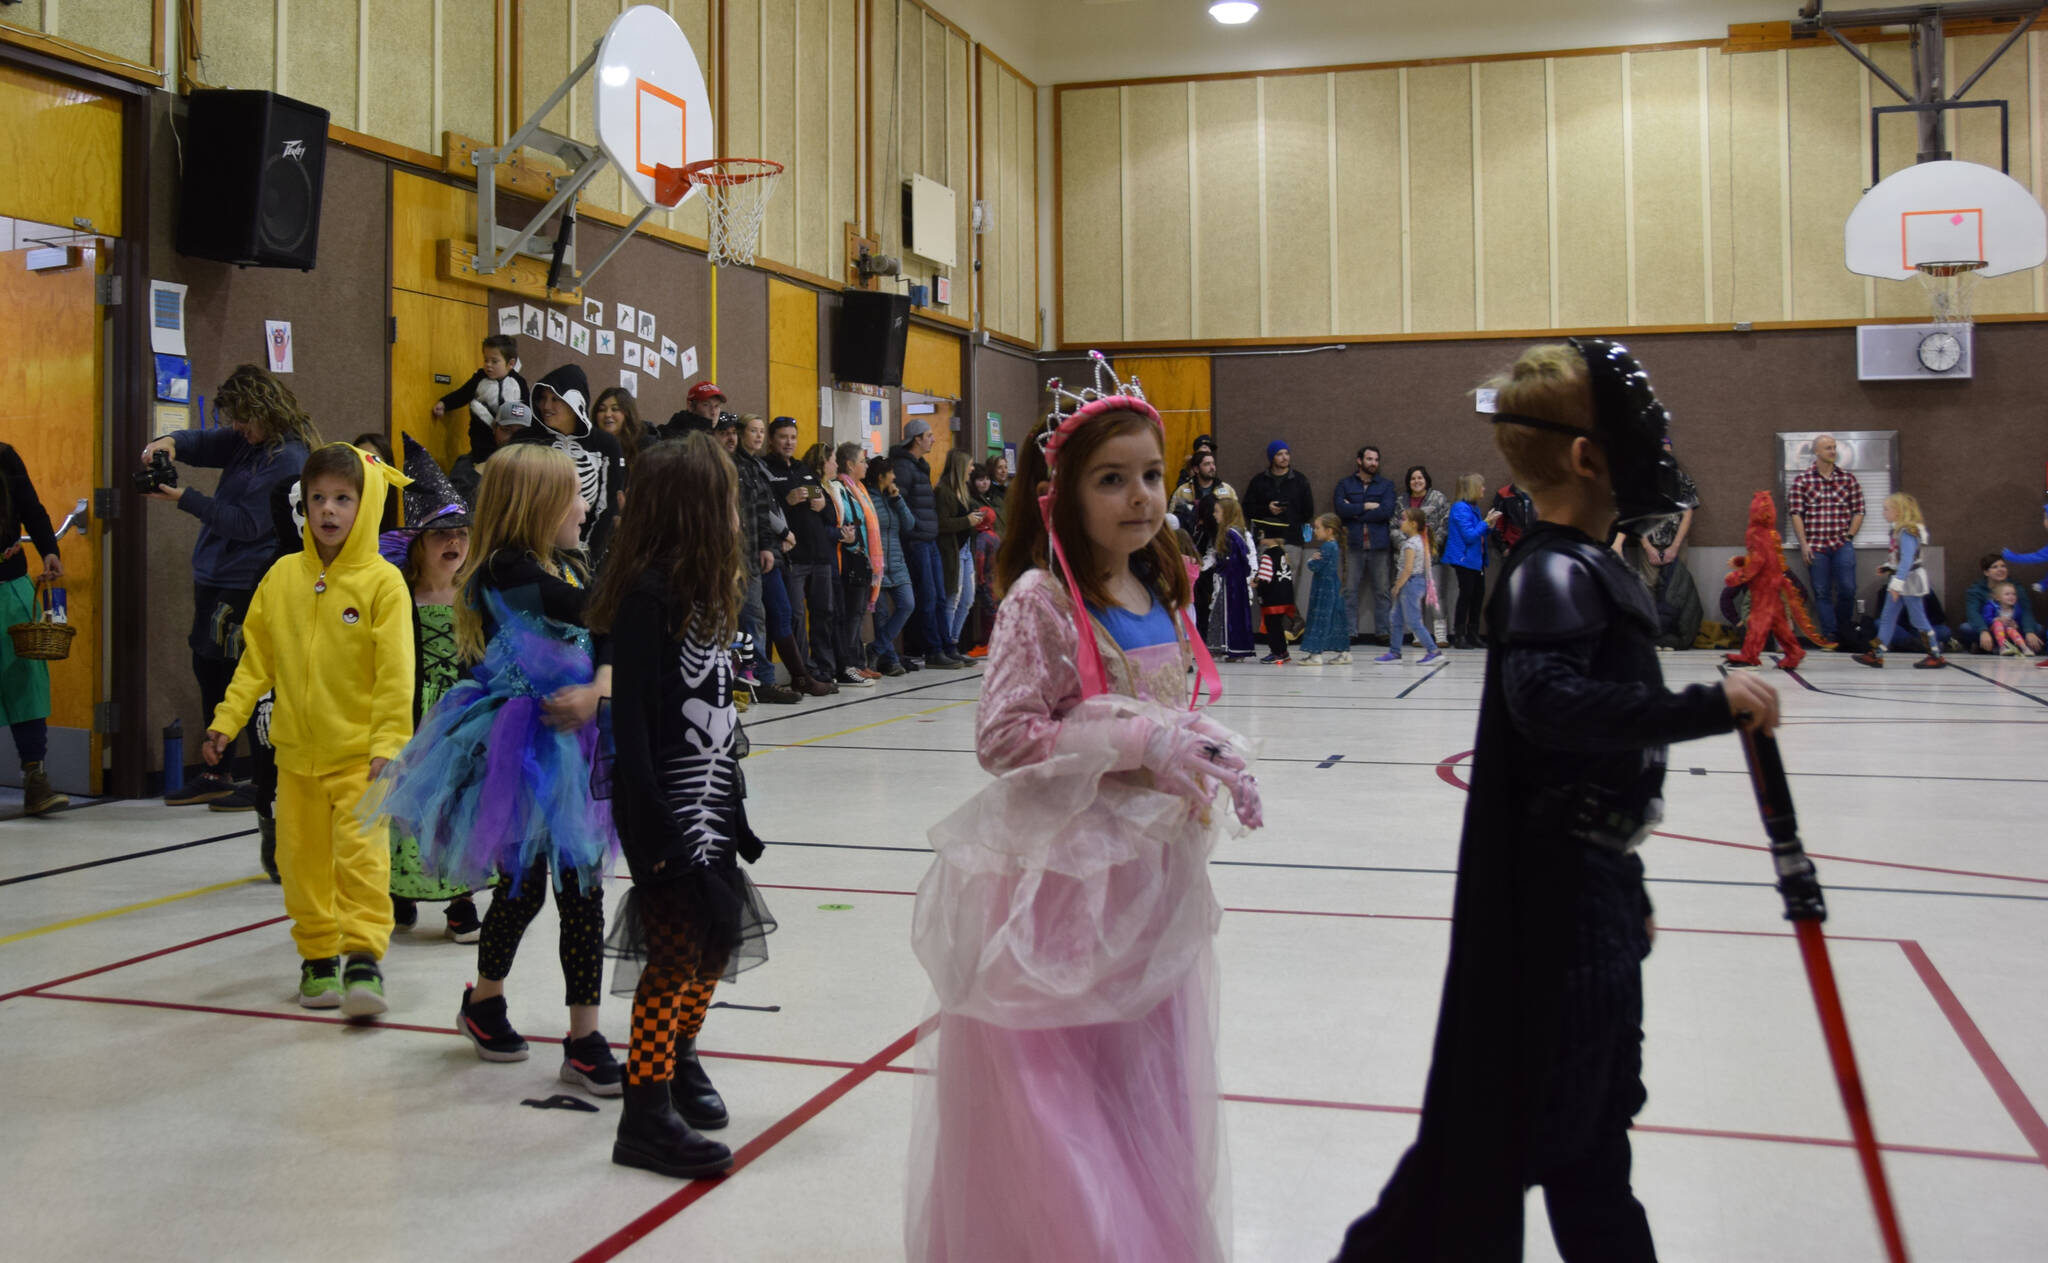 Pokemon, princesses, and an intergalactic leader enjoy their applause at the Paul Banks Elementary Halloween Parade on Monday, Oct. 31, 2022 in Homer, Alaska. (Photo by Charlie Menke / Homer News)